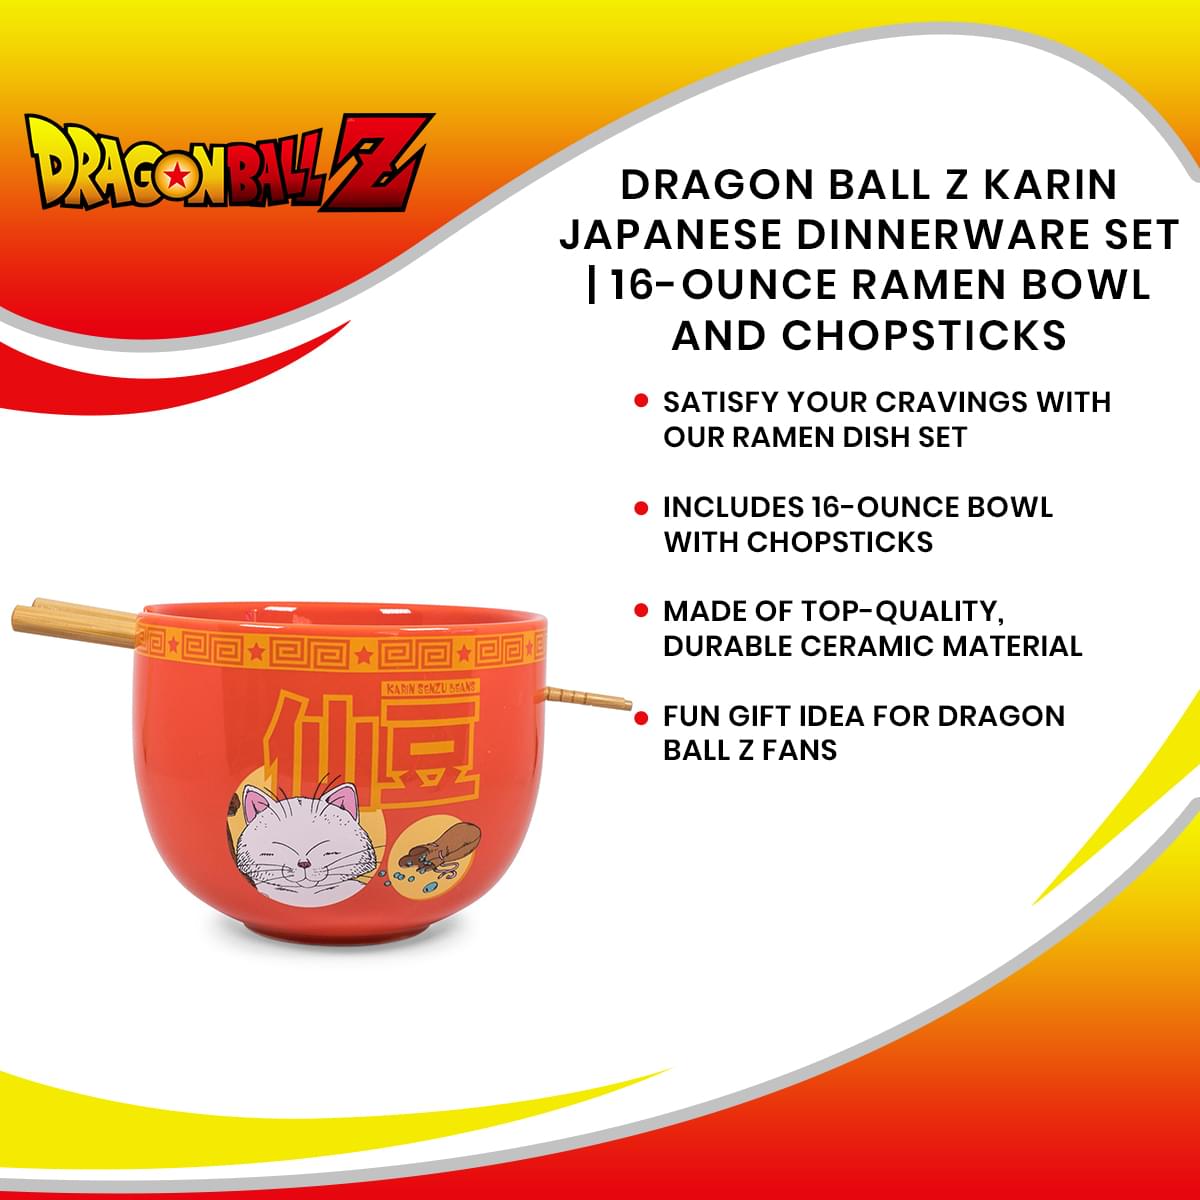 Just Funky Dragon Ball Z 4-star Ball Ceramic Noodle Bowl